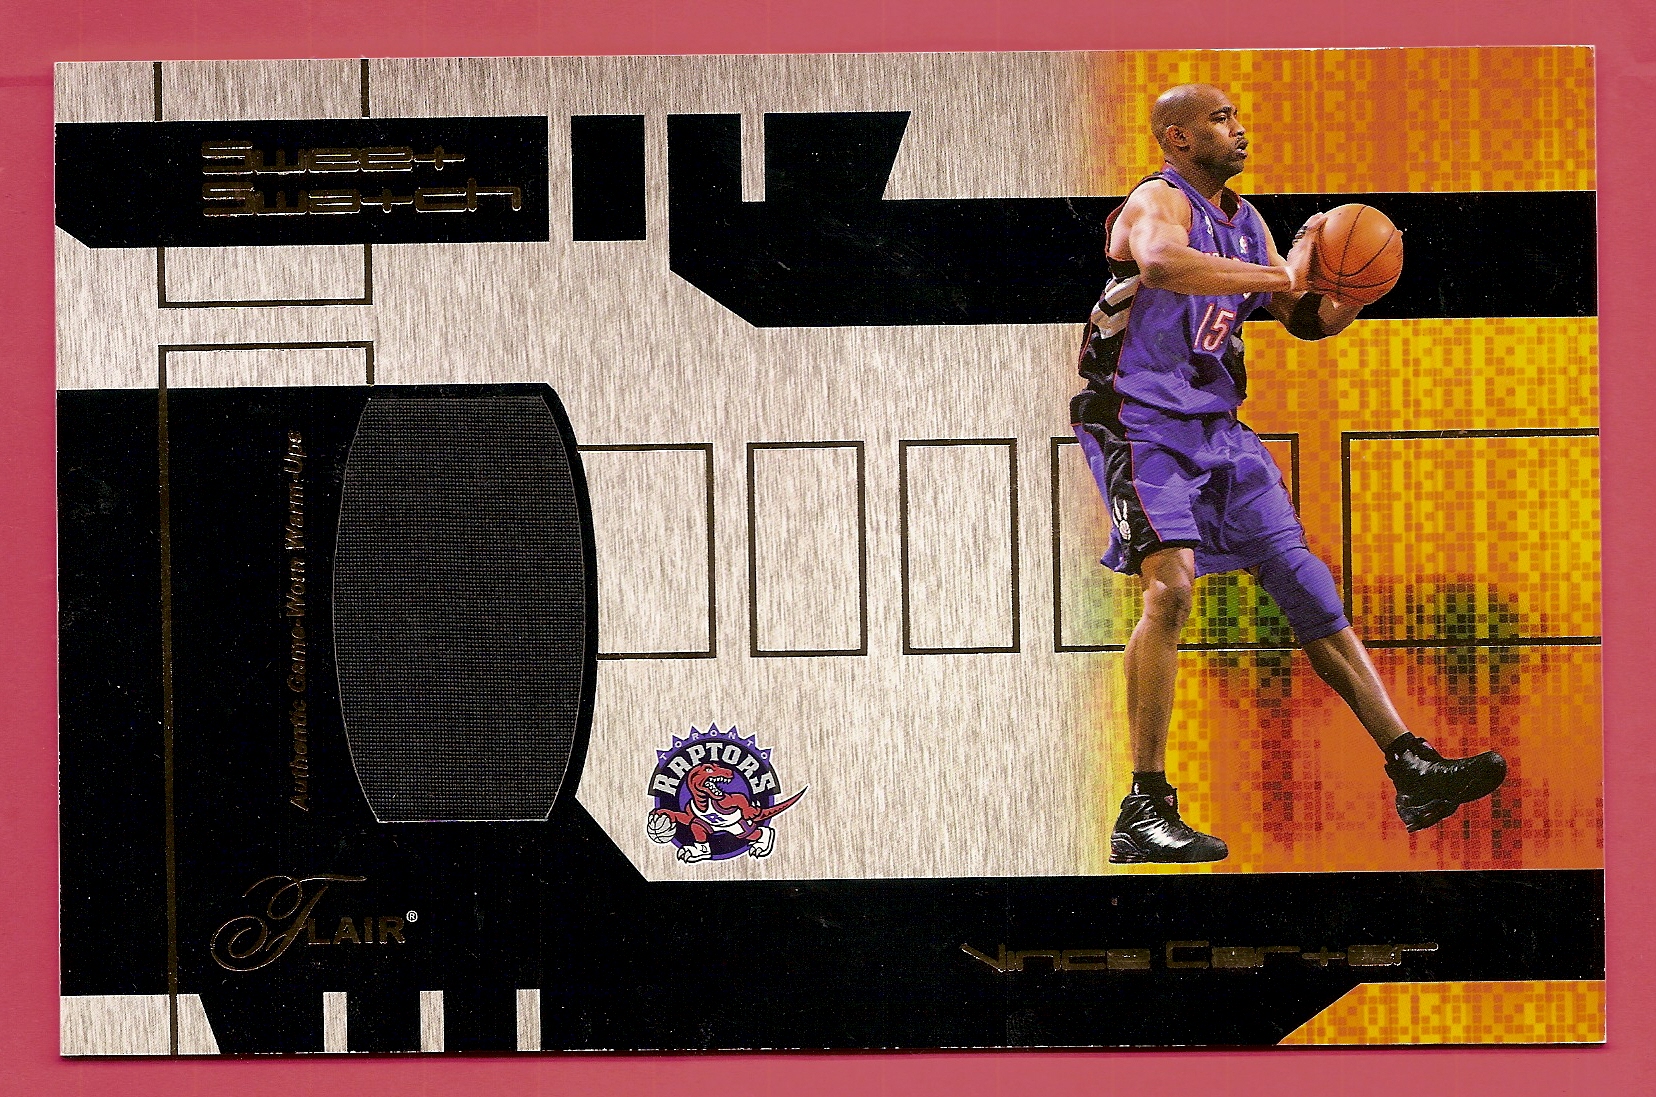 2002-03 Flair Sweet Swatch Game Used #SSVC Vince Carter/975